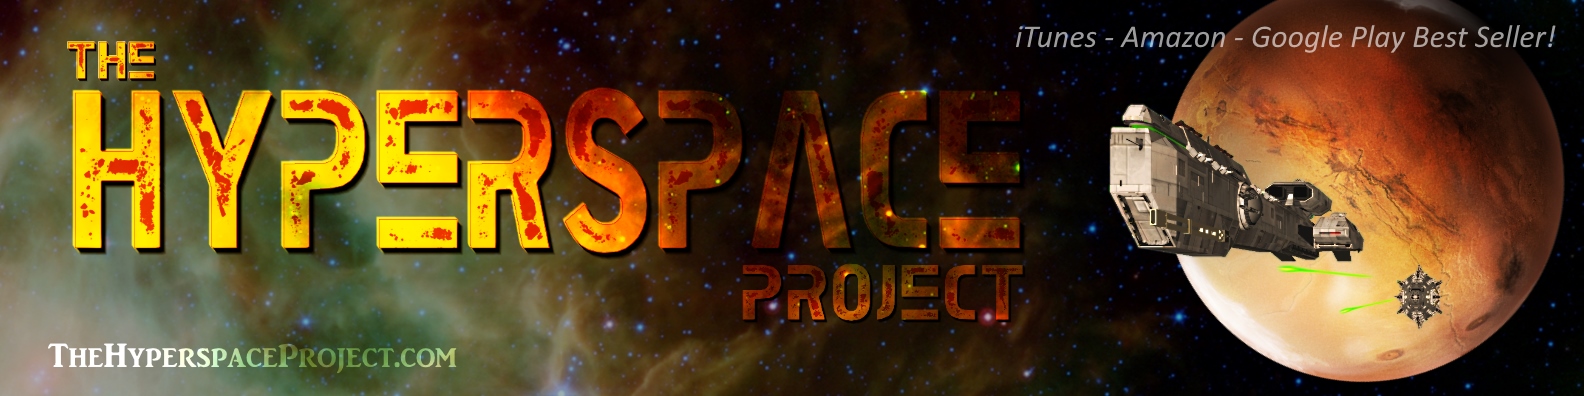 The Hyperspace Project